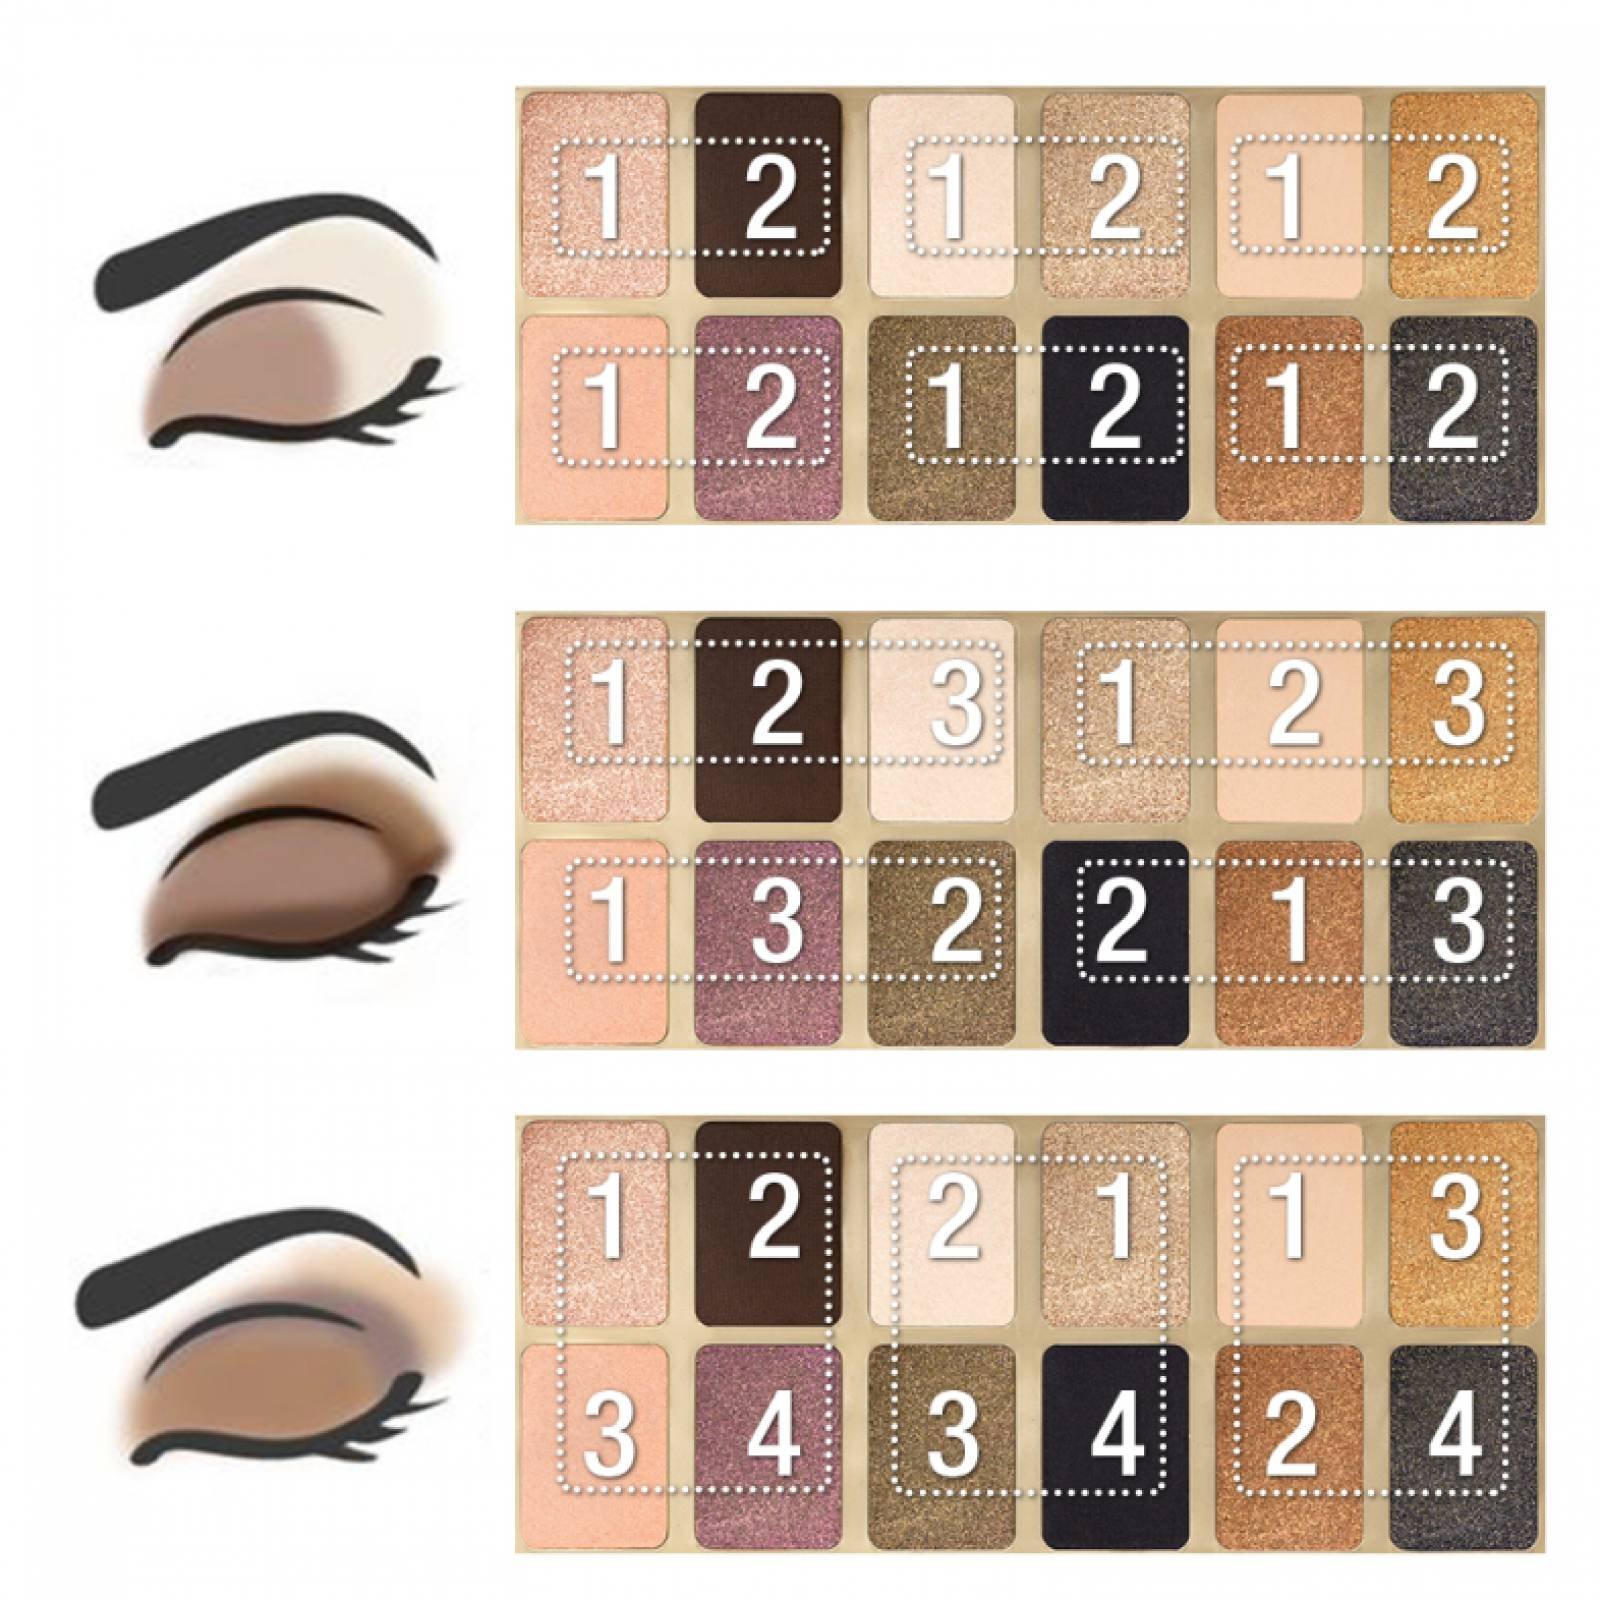 Paleta Sombras Ojos The Nudes Maquillaje Maybelline